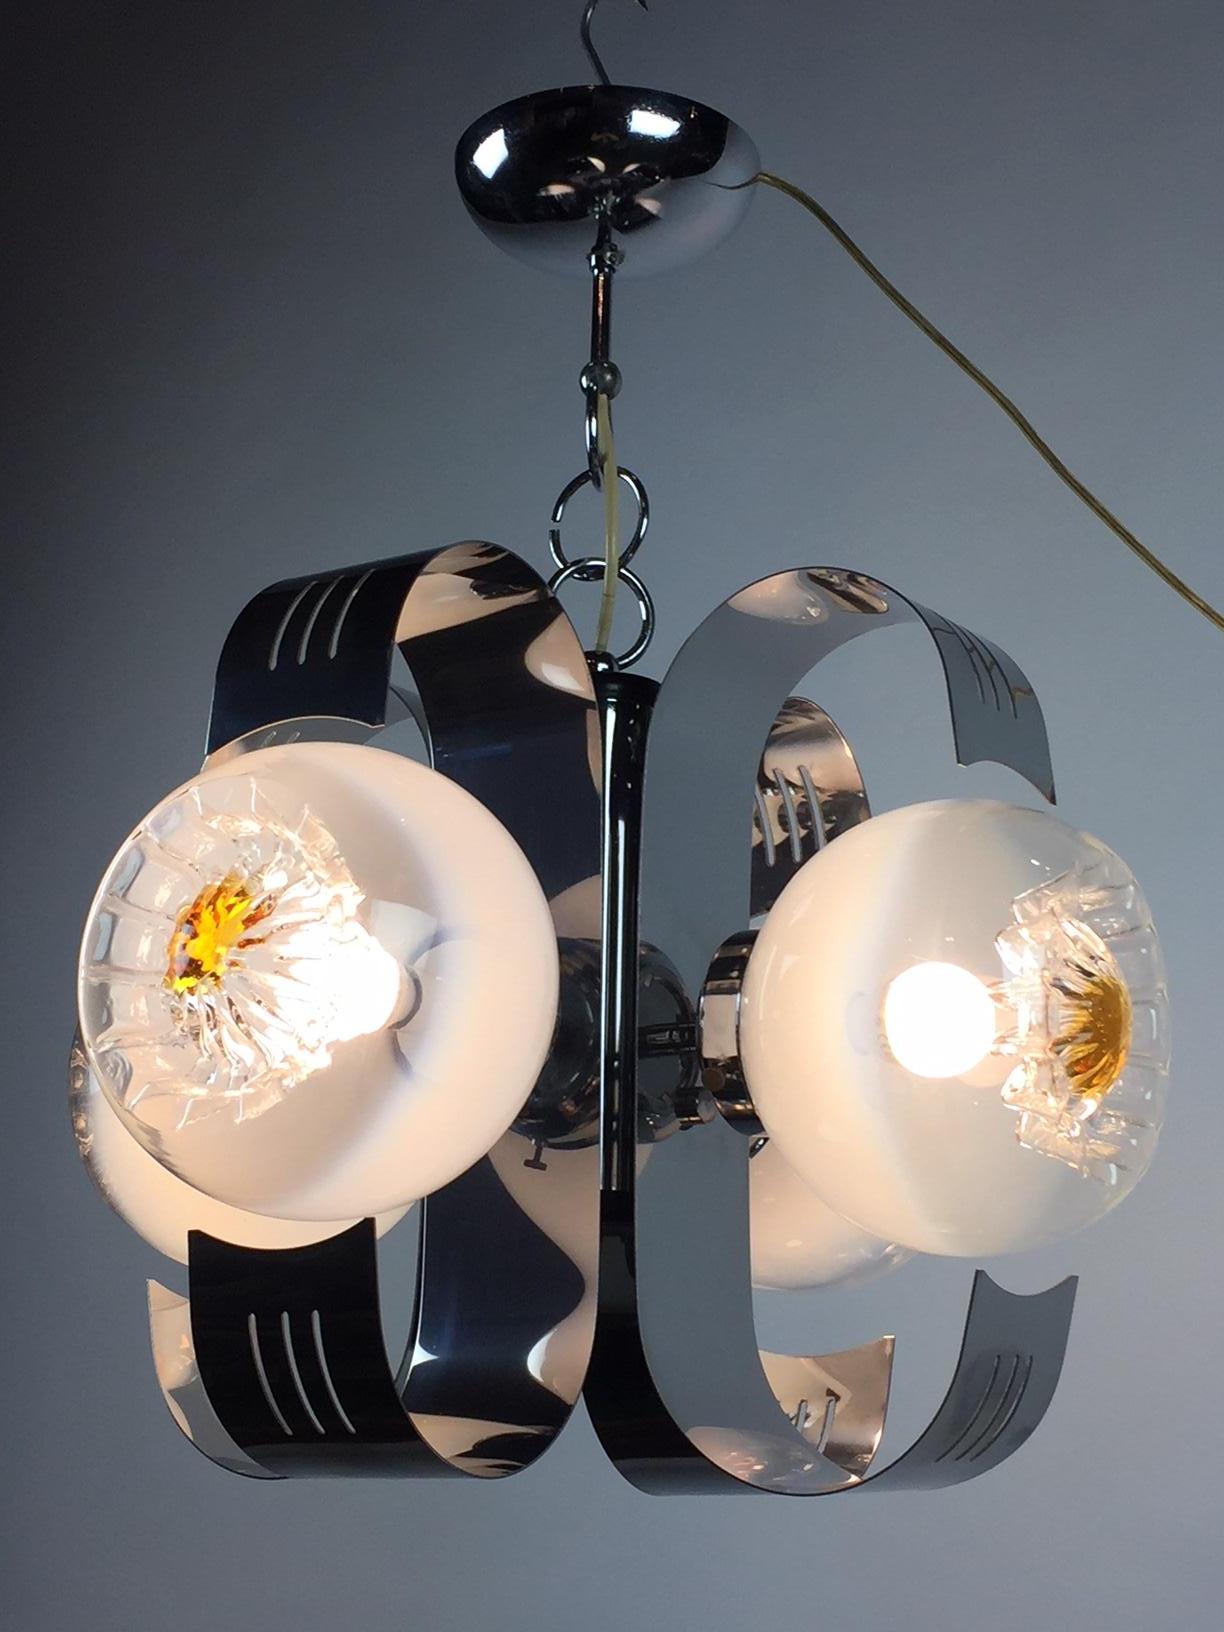 1970s modern chandelier - Pendant - Hanging lamp - Ceiling lamp - Space Age lighting
designed by Angelo Vittorio - Italy - Italian design.
Bended chrome armature with 4 hand blown Murano art glass globes with orange centres like flowers.
This